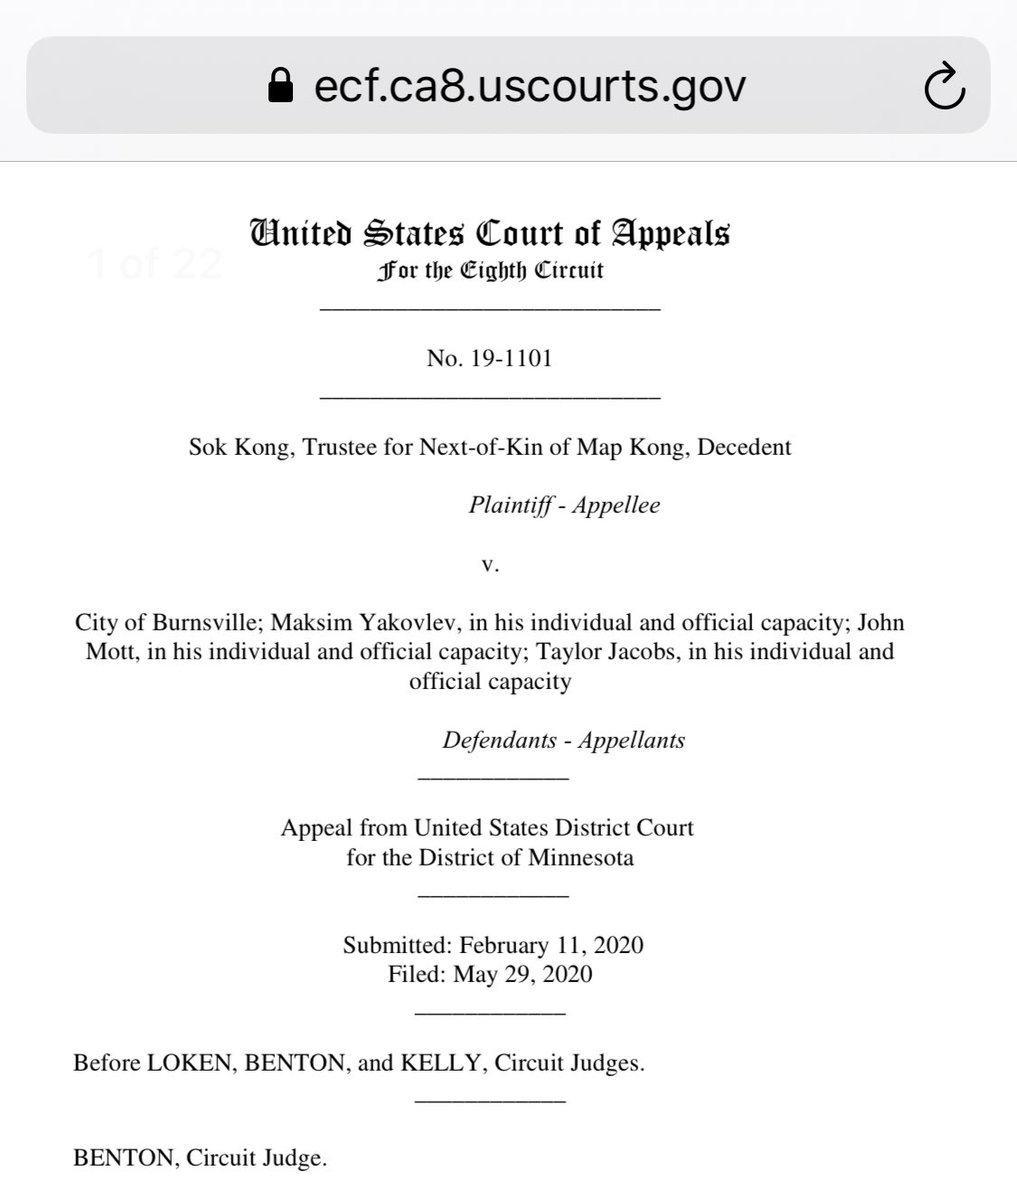 The Eighth Circuit Court of Appeals decision is here:  https://ecf.ca8.uscourts.gov/opndir/20/05/191101P.pdfI'd encourage you to read the dissent